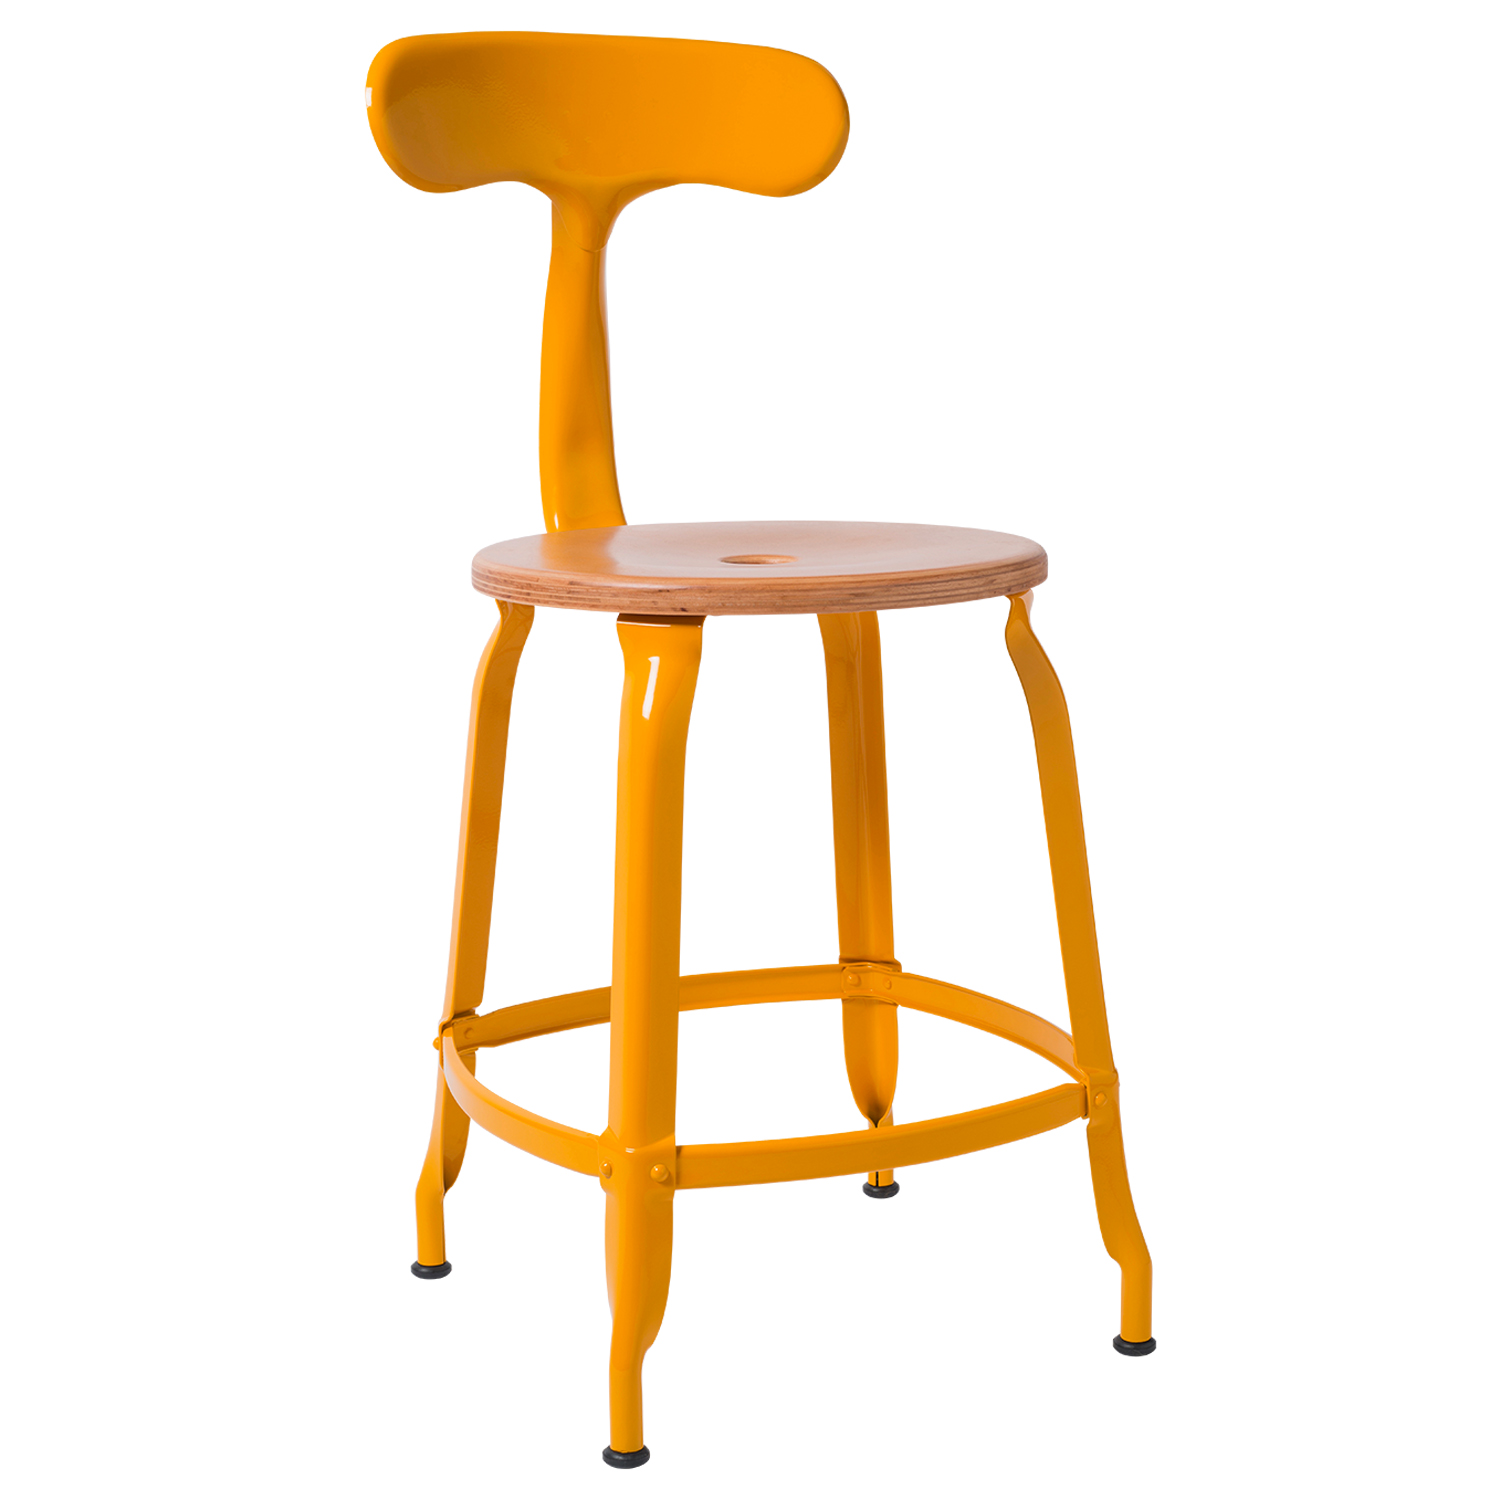 CHAISES Nicolle Stuhl natural narzissengelb Sitzhöhe 47cm Holz natural und Metall Glossy Daffodil Yellow